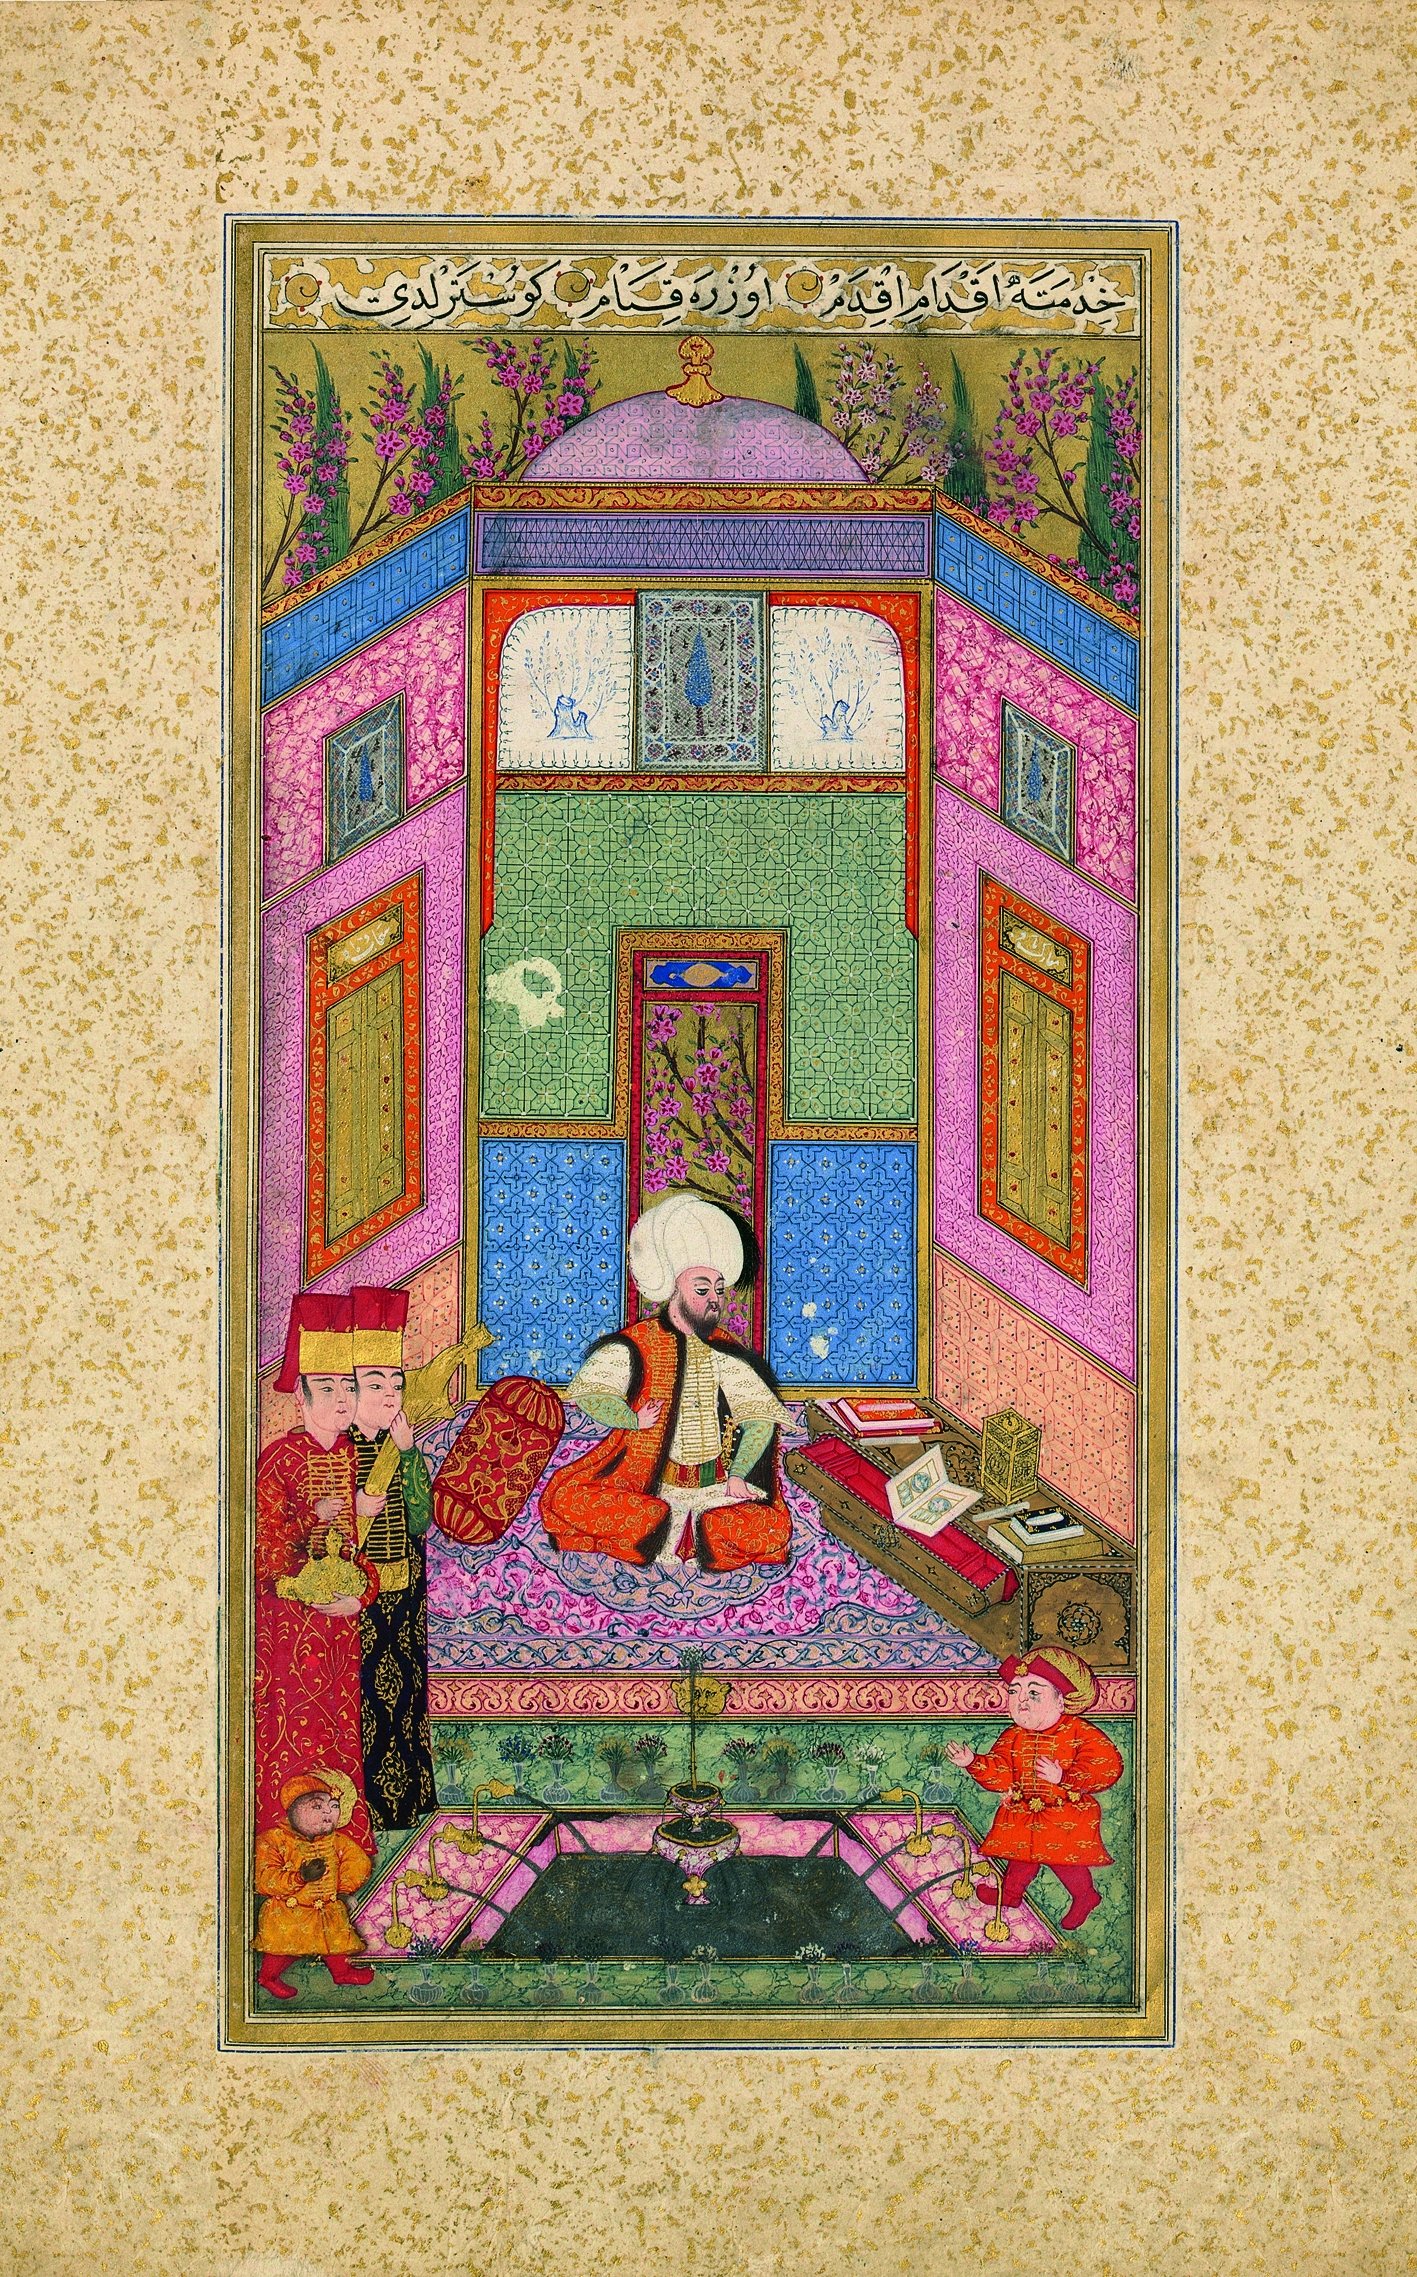 The first miniature of the illuminated manuscript, “The Book of Felicity,” depicts Sultan Murad III reading.